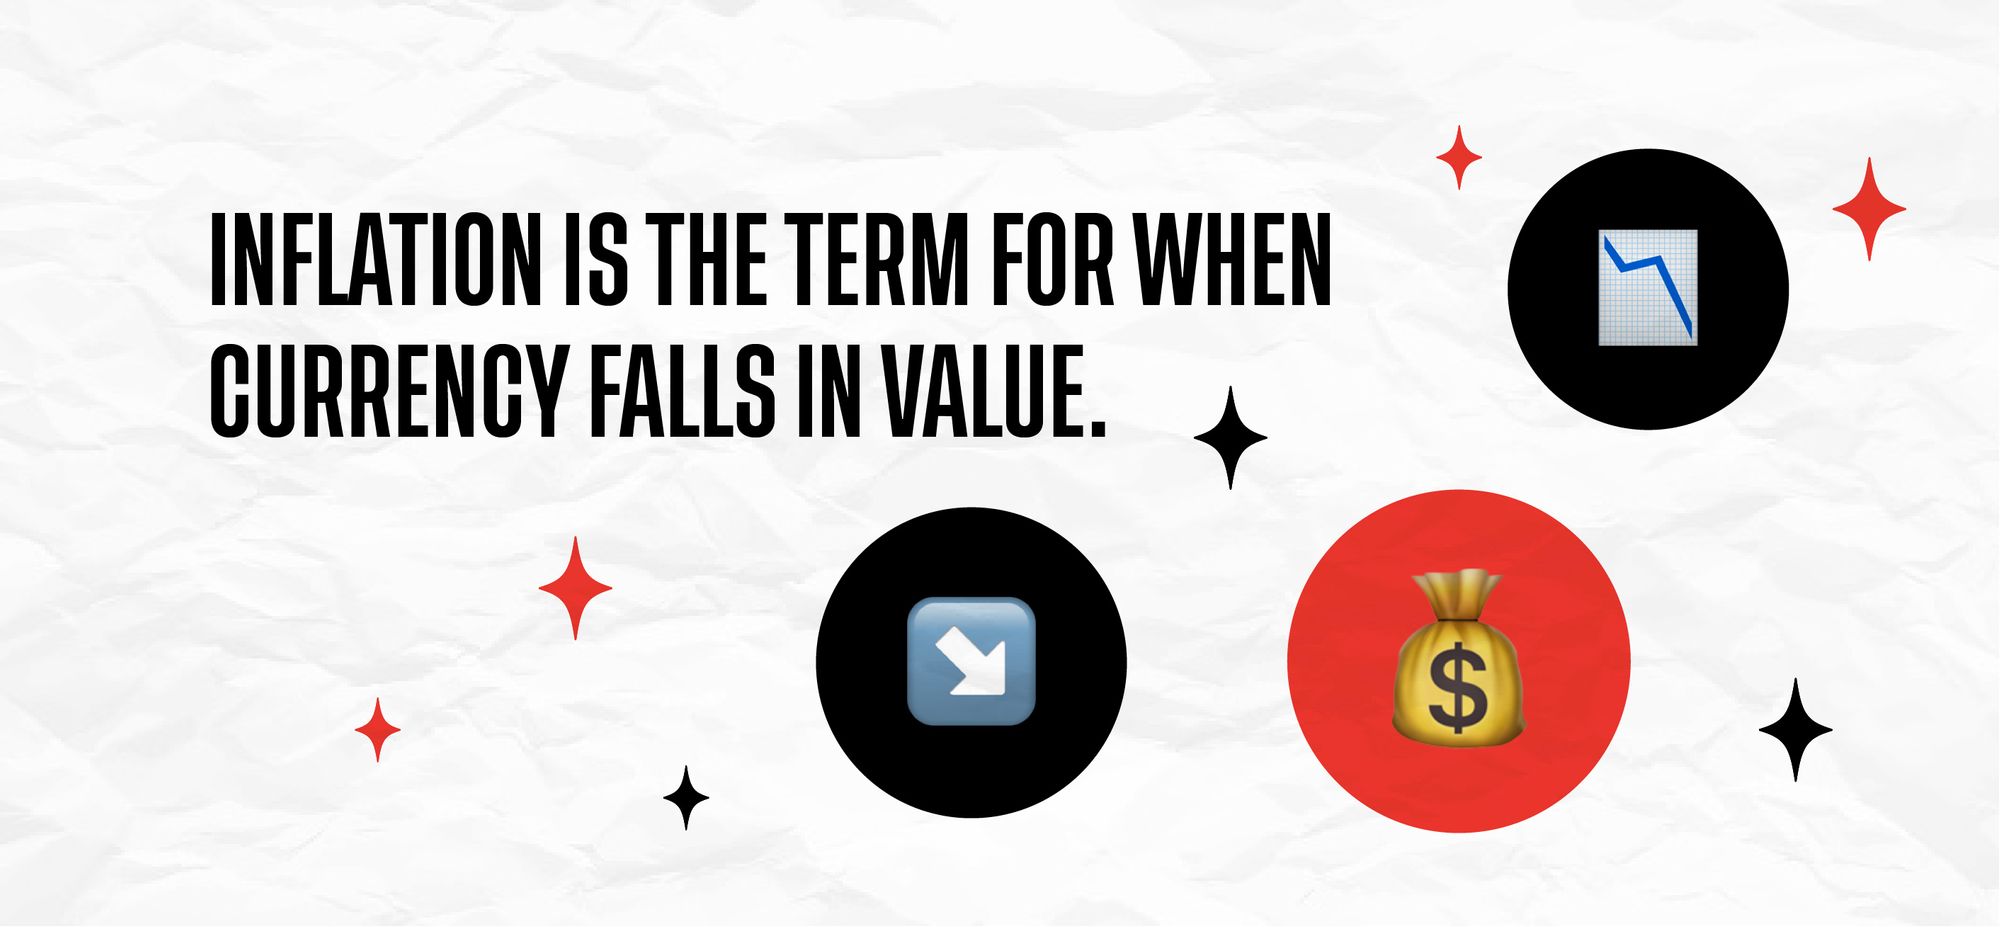 Inflation is the term for when currency falls in value.